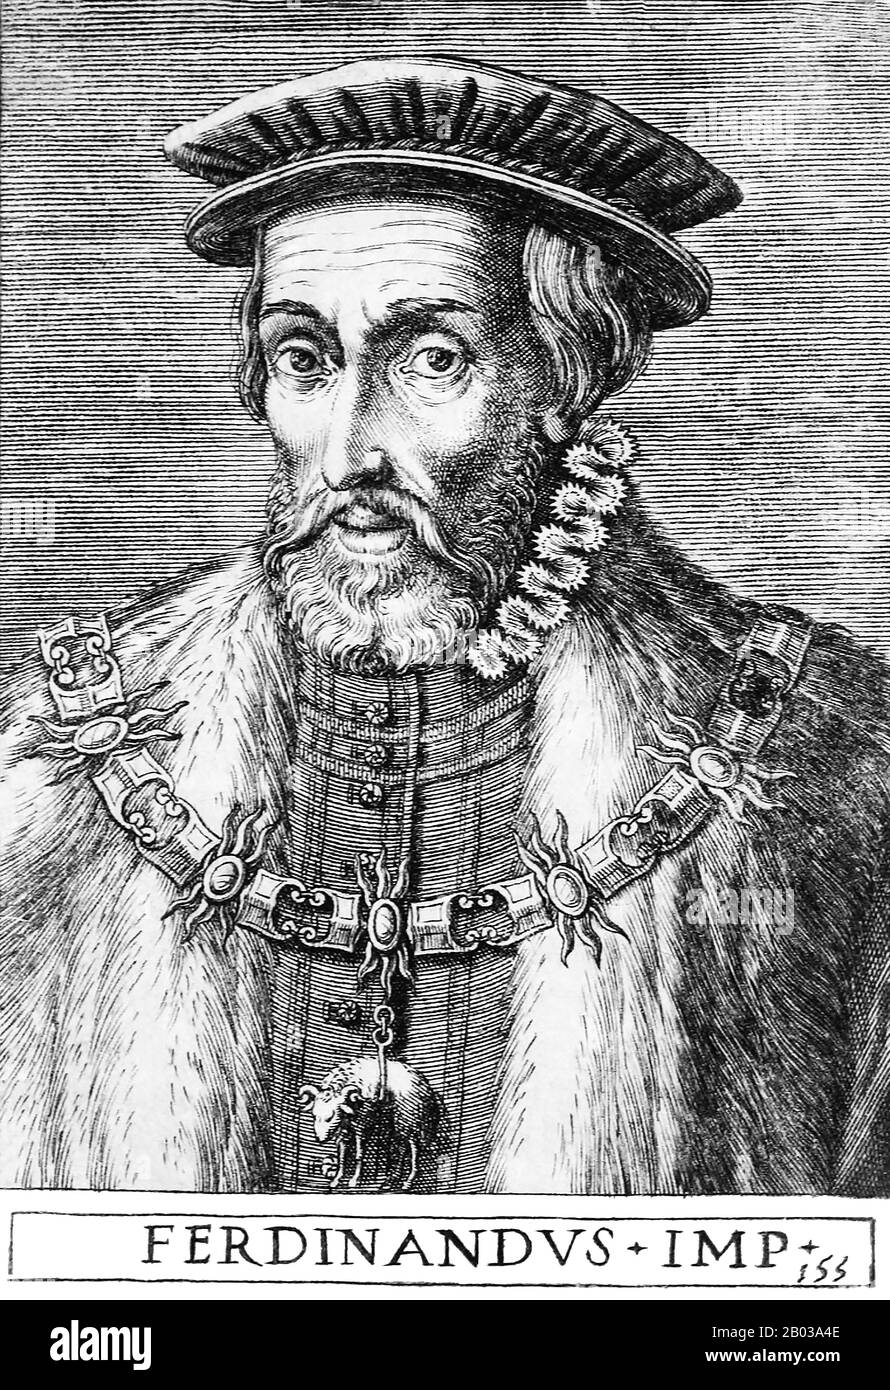 Ferdinand I (1503-1564) was the son of Philip I of Castile and Queen Joanna I of Castile, grandson of Emperor Maximilian I and younger brother of future emperor Charles V. Born and raised in Spain, he was sent to Flanders in 1518. When Charles became Holy Roman emperor in 1519, Ferdinand was entrusted with the governing of their hereditary Austrian lands, becoming Archduke of Austria and adopting the German culture as his own.  Ferdinand became King of Bohemia and Hungary in 1526 after the death of his brother-in-law Louis II, and served as his brother Charles' deputy in the Holy Roman Empire Stock Photo